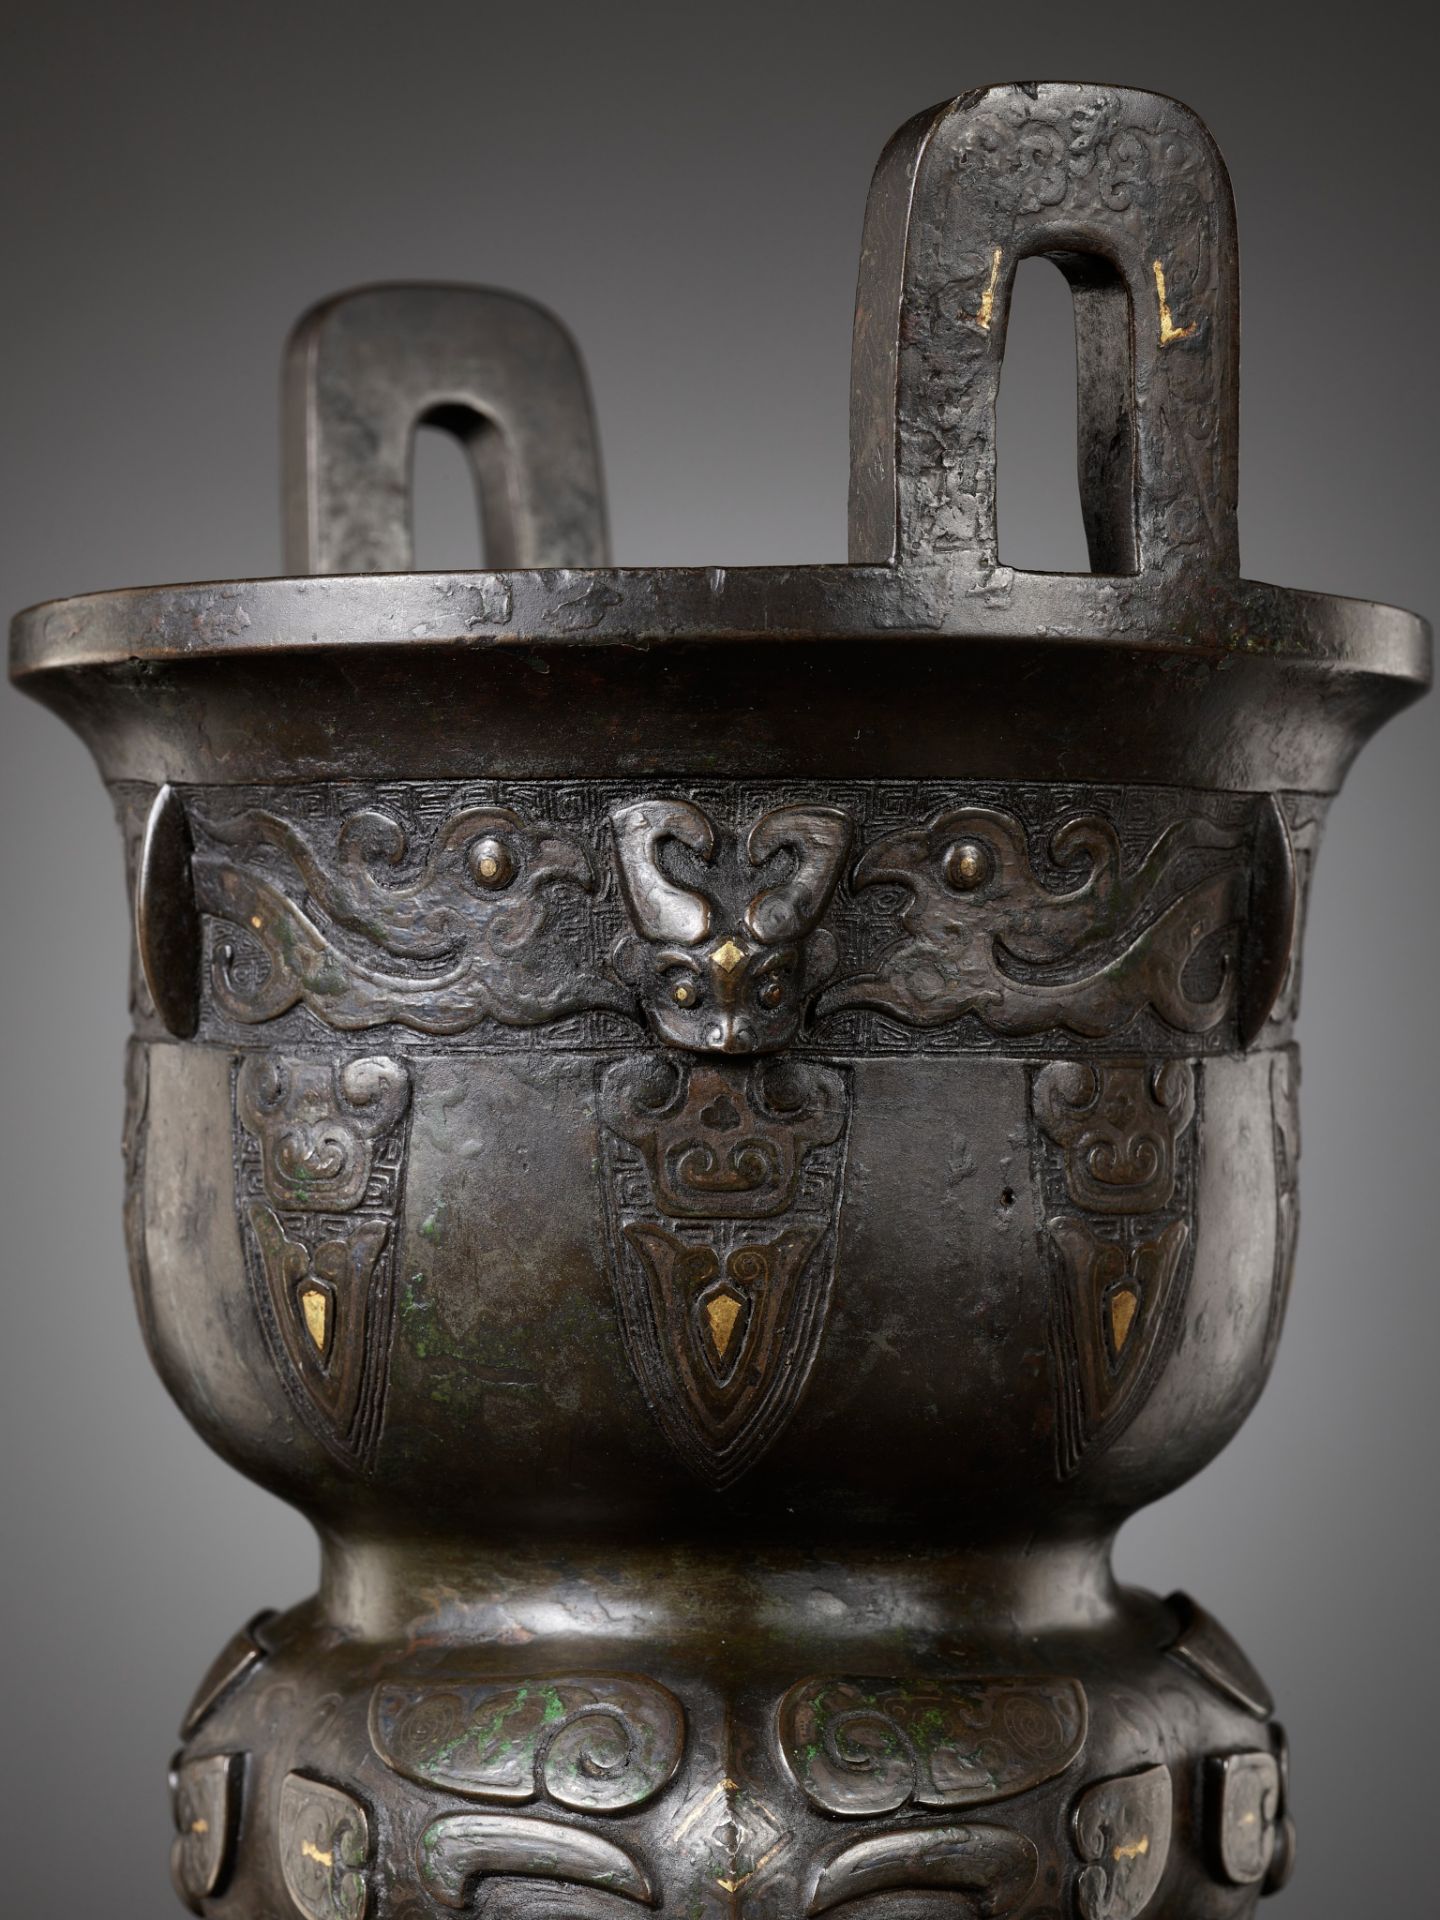 A GOLD AND SILVER-INLAID BRONZE ARCHAISTIC STEAMER, SONG TO MING DYNASTY - Image 17 of 24